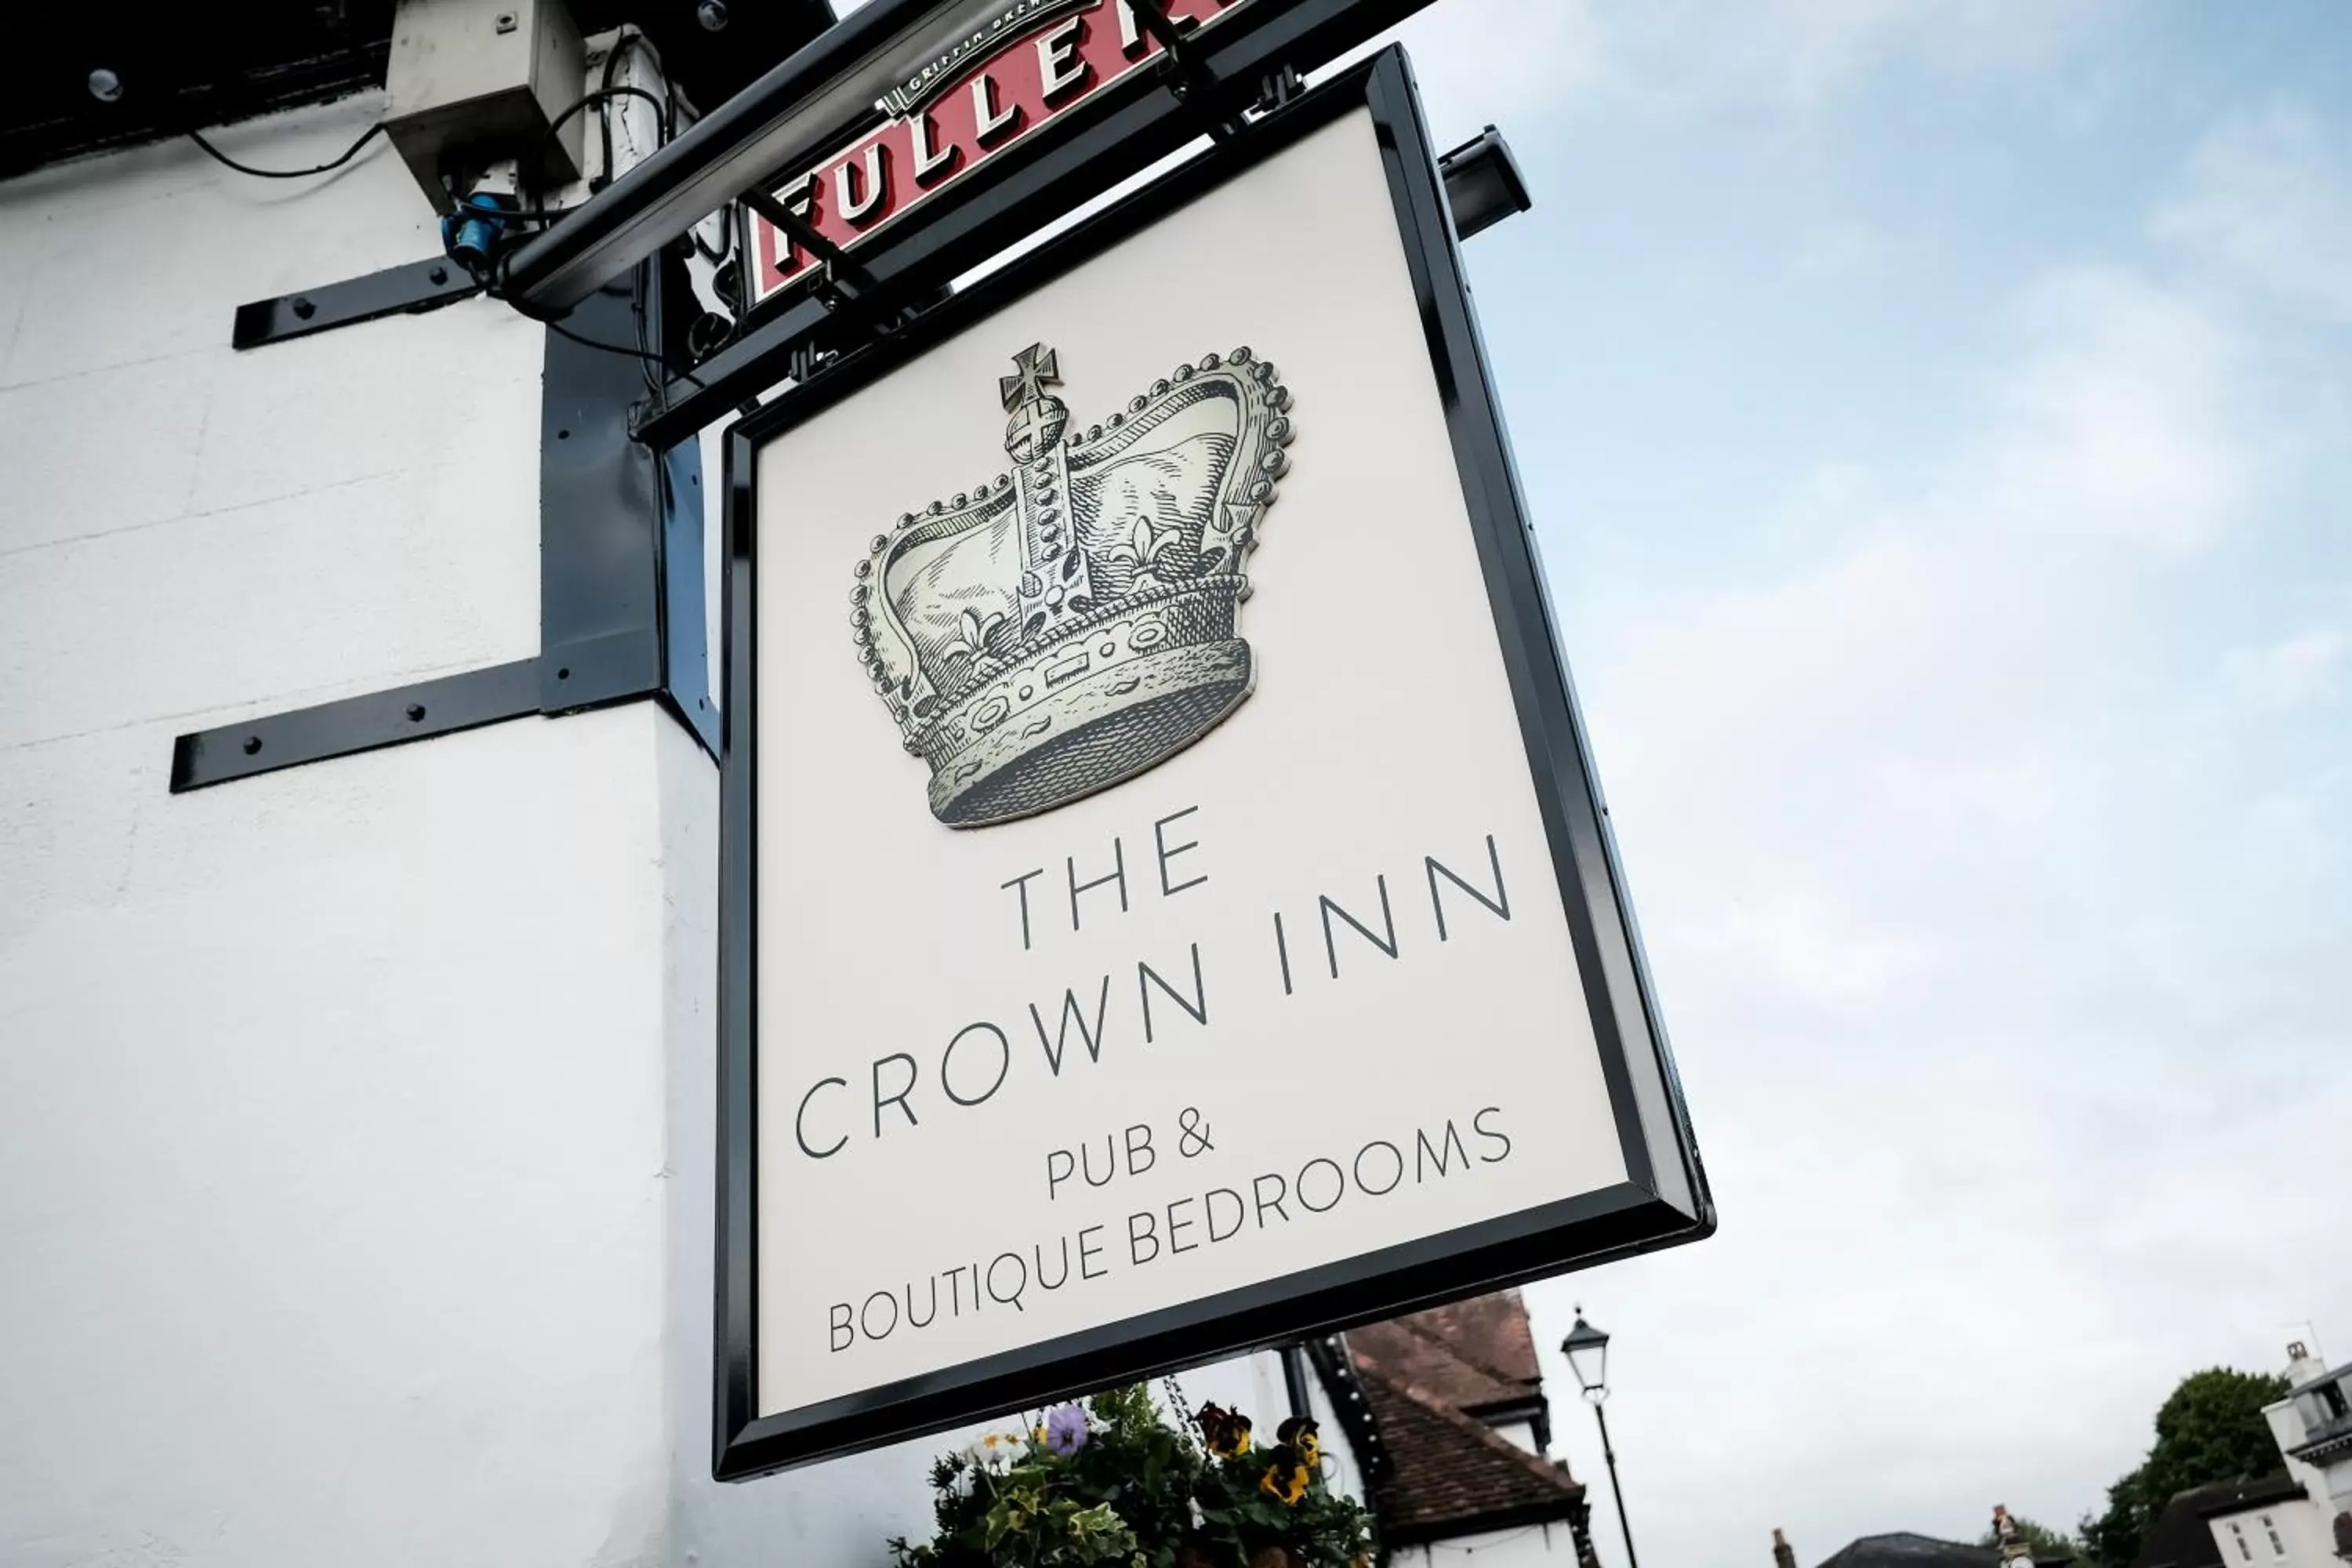 Property logo or sign, Property Logo/Sign in The Crown Inn